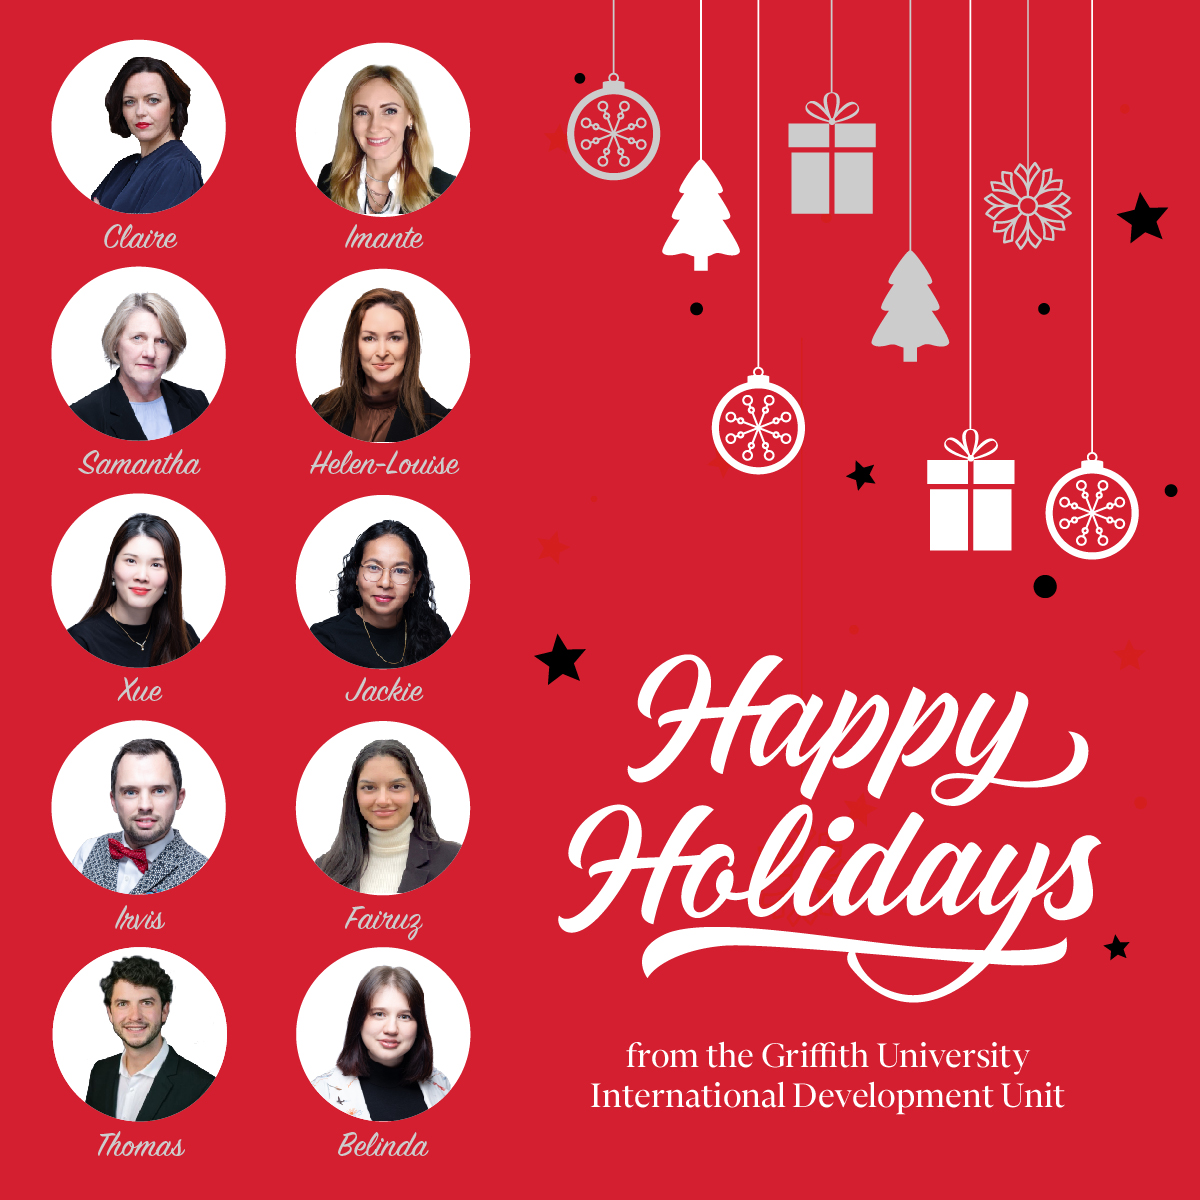 We would like to thank everyone involved in our programs for their hard work and dedication throughout 2023. We look forward to developing and delivering even more international programs next year! Happy Holidays, Claire Green and the Griffith International Development Unit Team